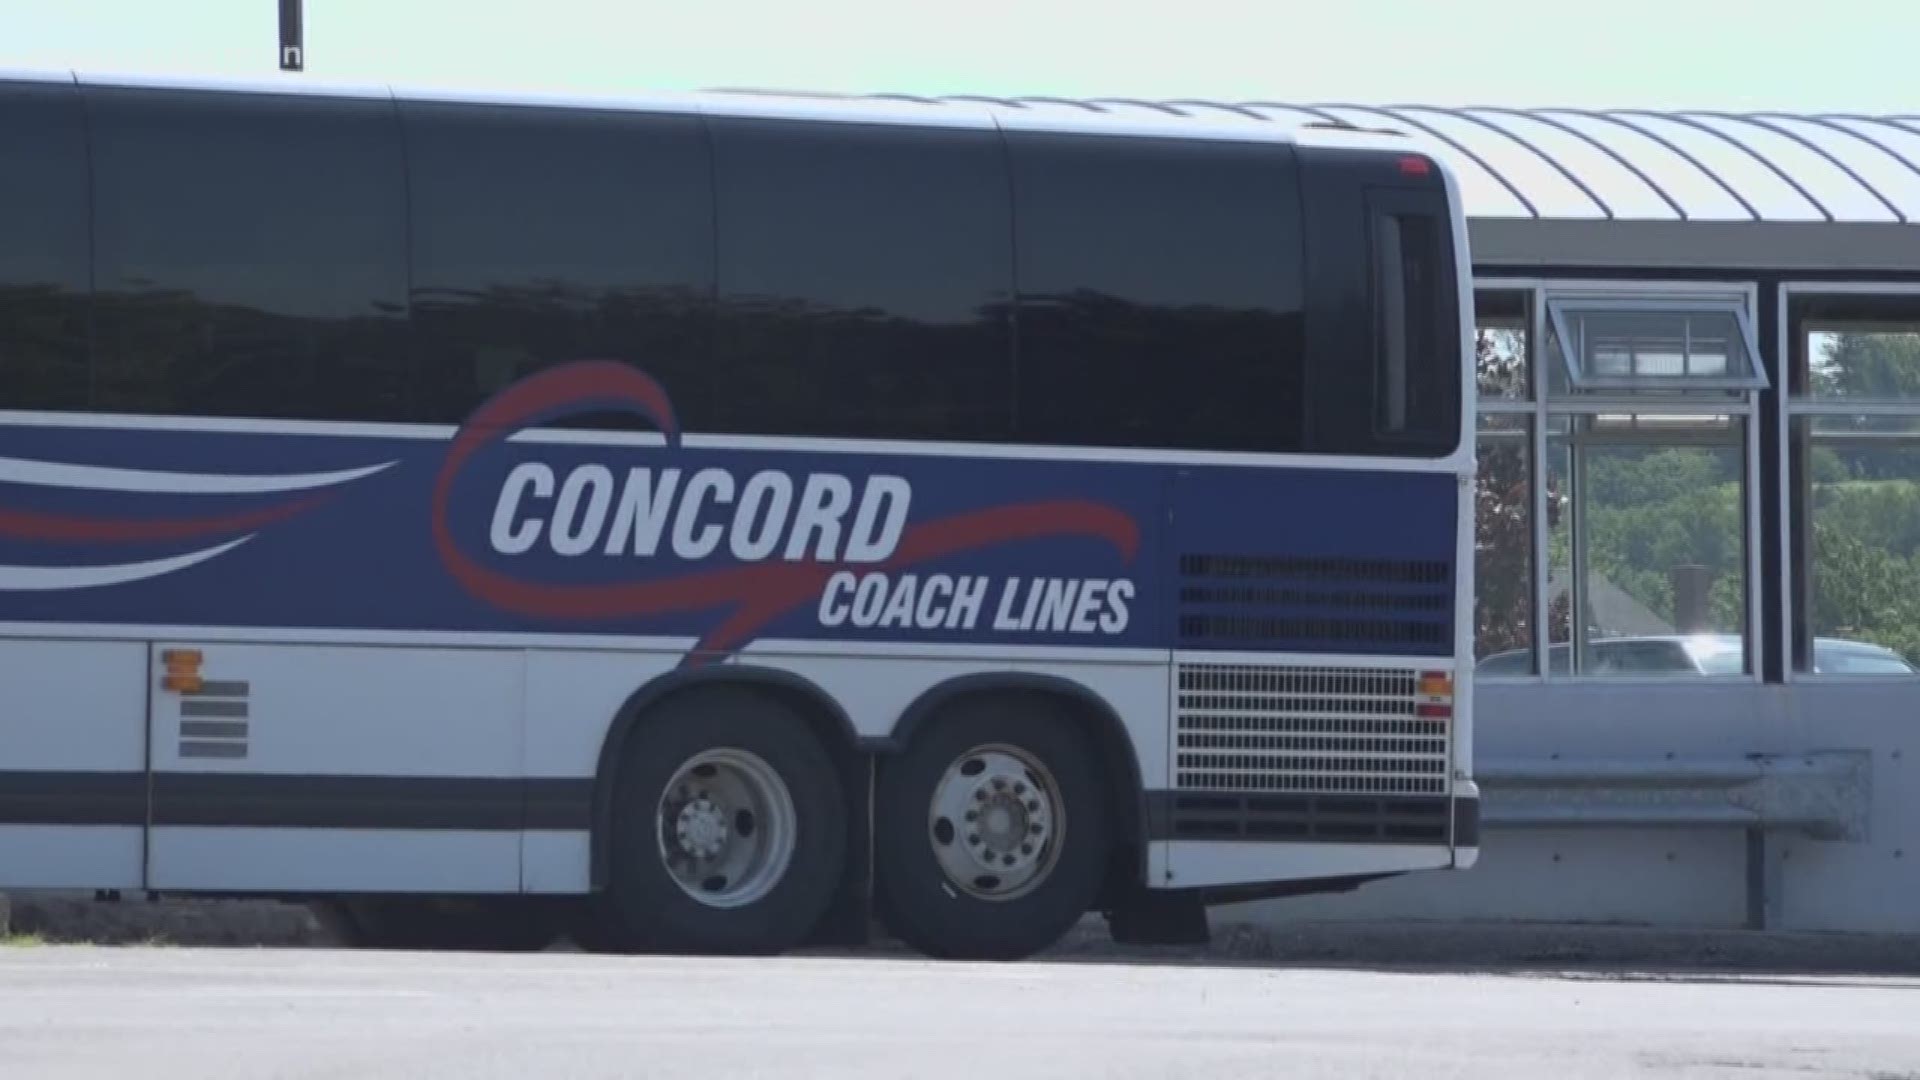 After a lawsuit, the ACLU is calling on Concord Coach Lines to stand up to U.S. Customs and Border Protection and prevent them from performing routine transportation checks for illegal immigrants.